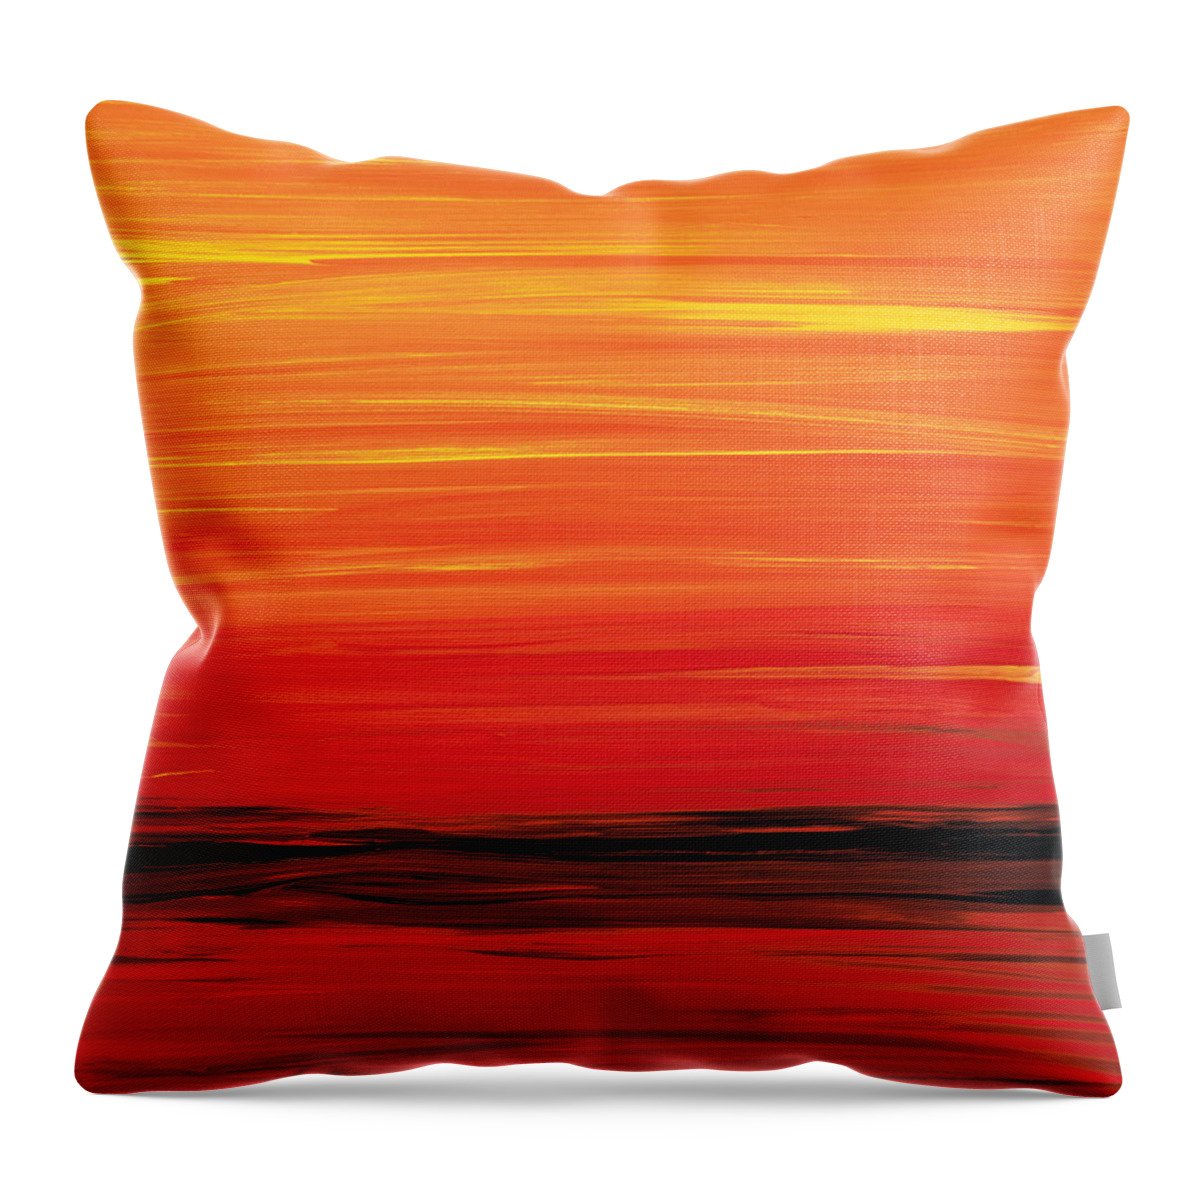 Red Throw Pillow featuring the painting Ruby Shore - Red And Orange Abstract by Sharon Cummings